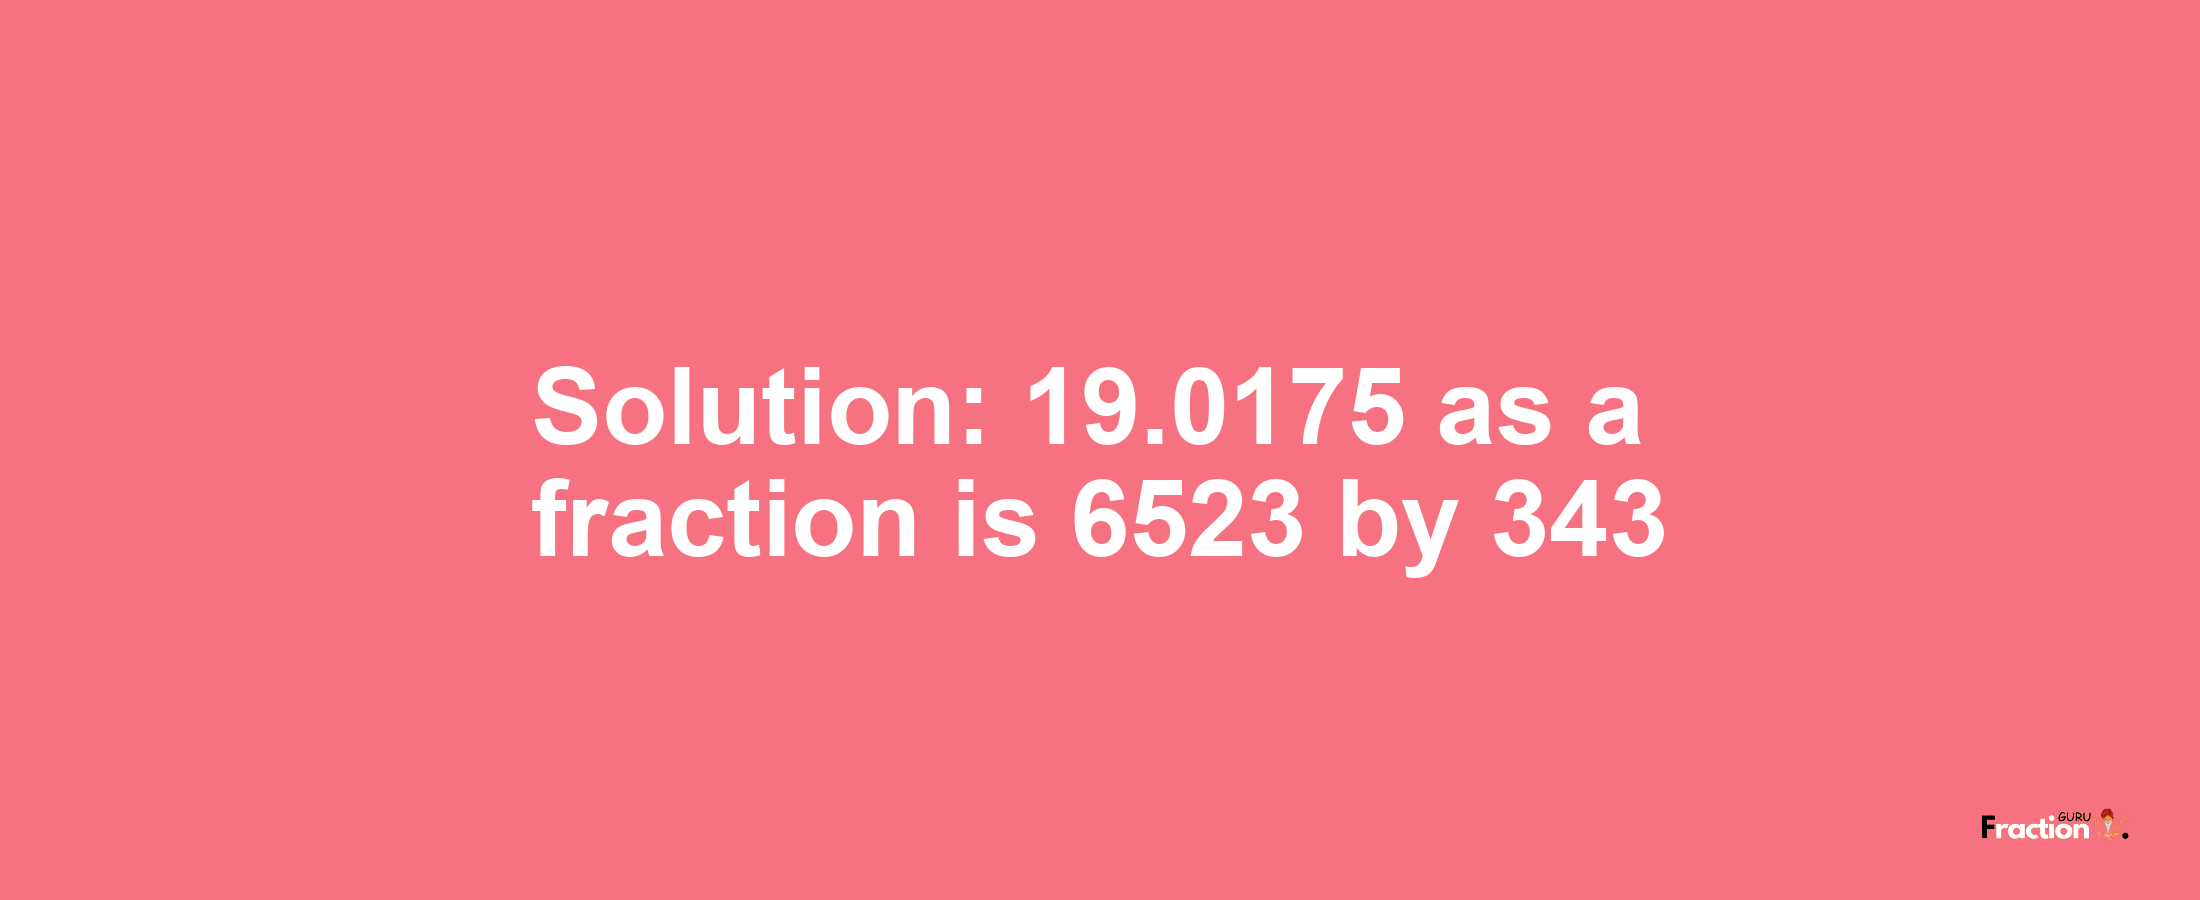 Solution:19.0175 as a fraction is 6523/343